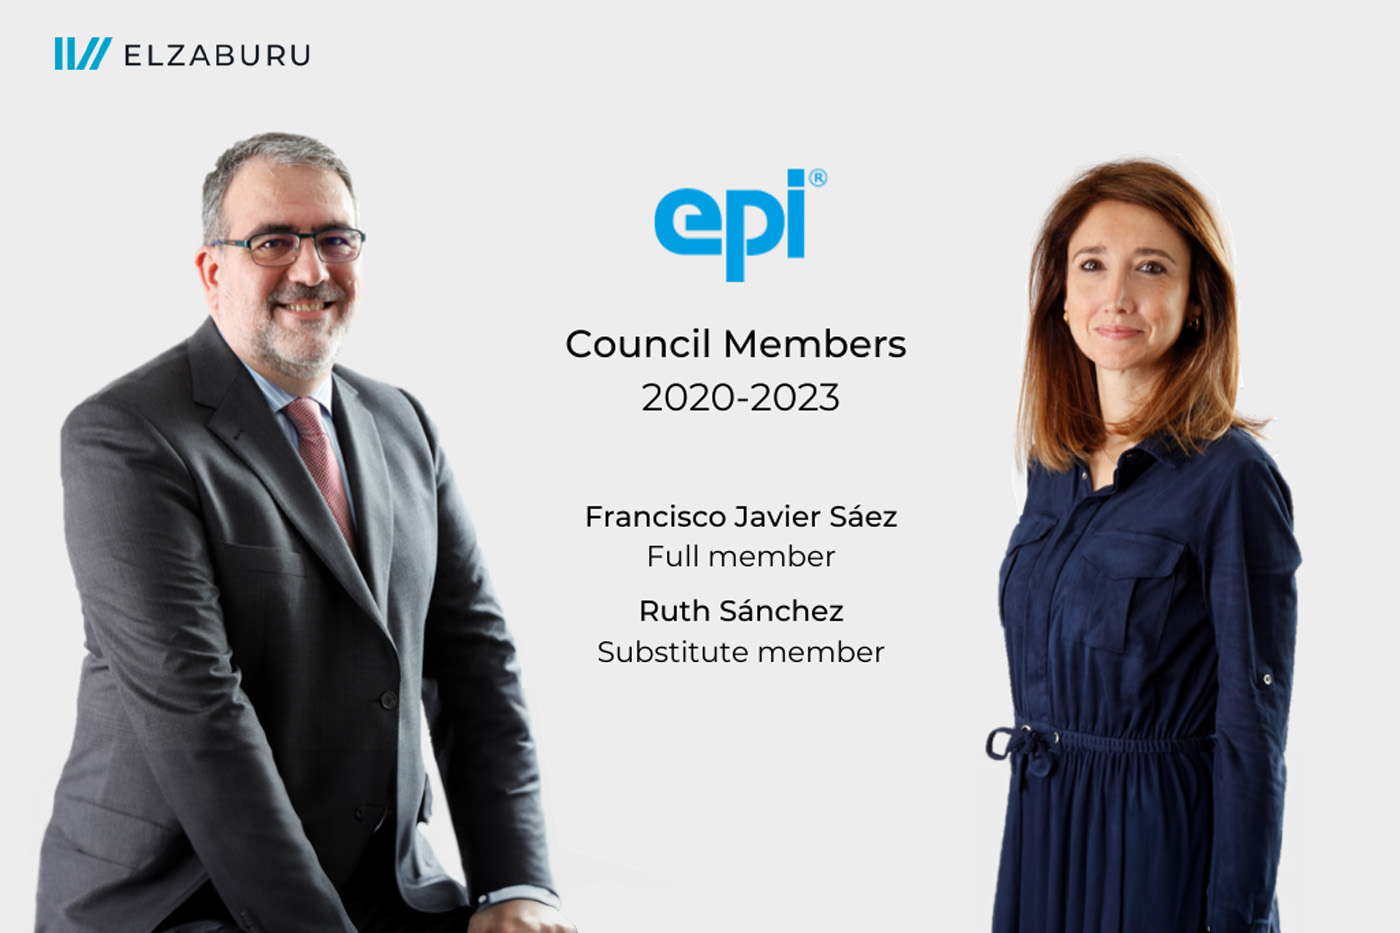 Francisco Javier Sáez and Ruth Sánchez members of the EPI Spain council